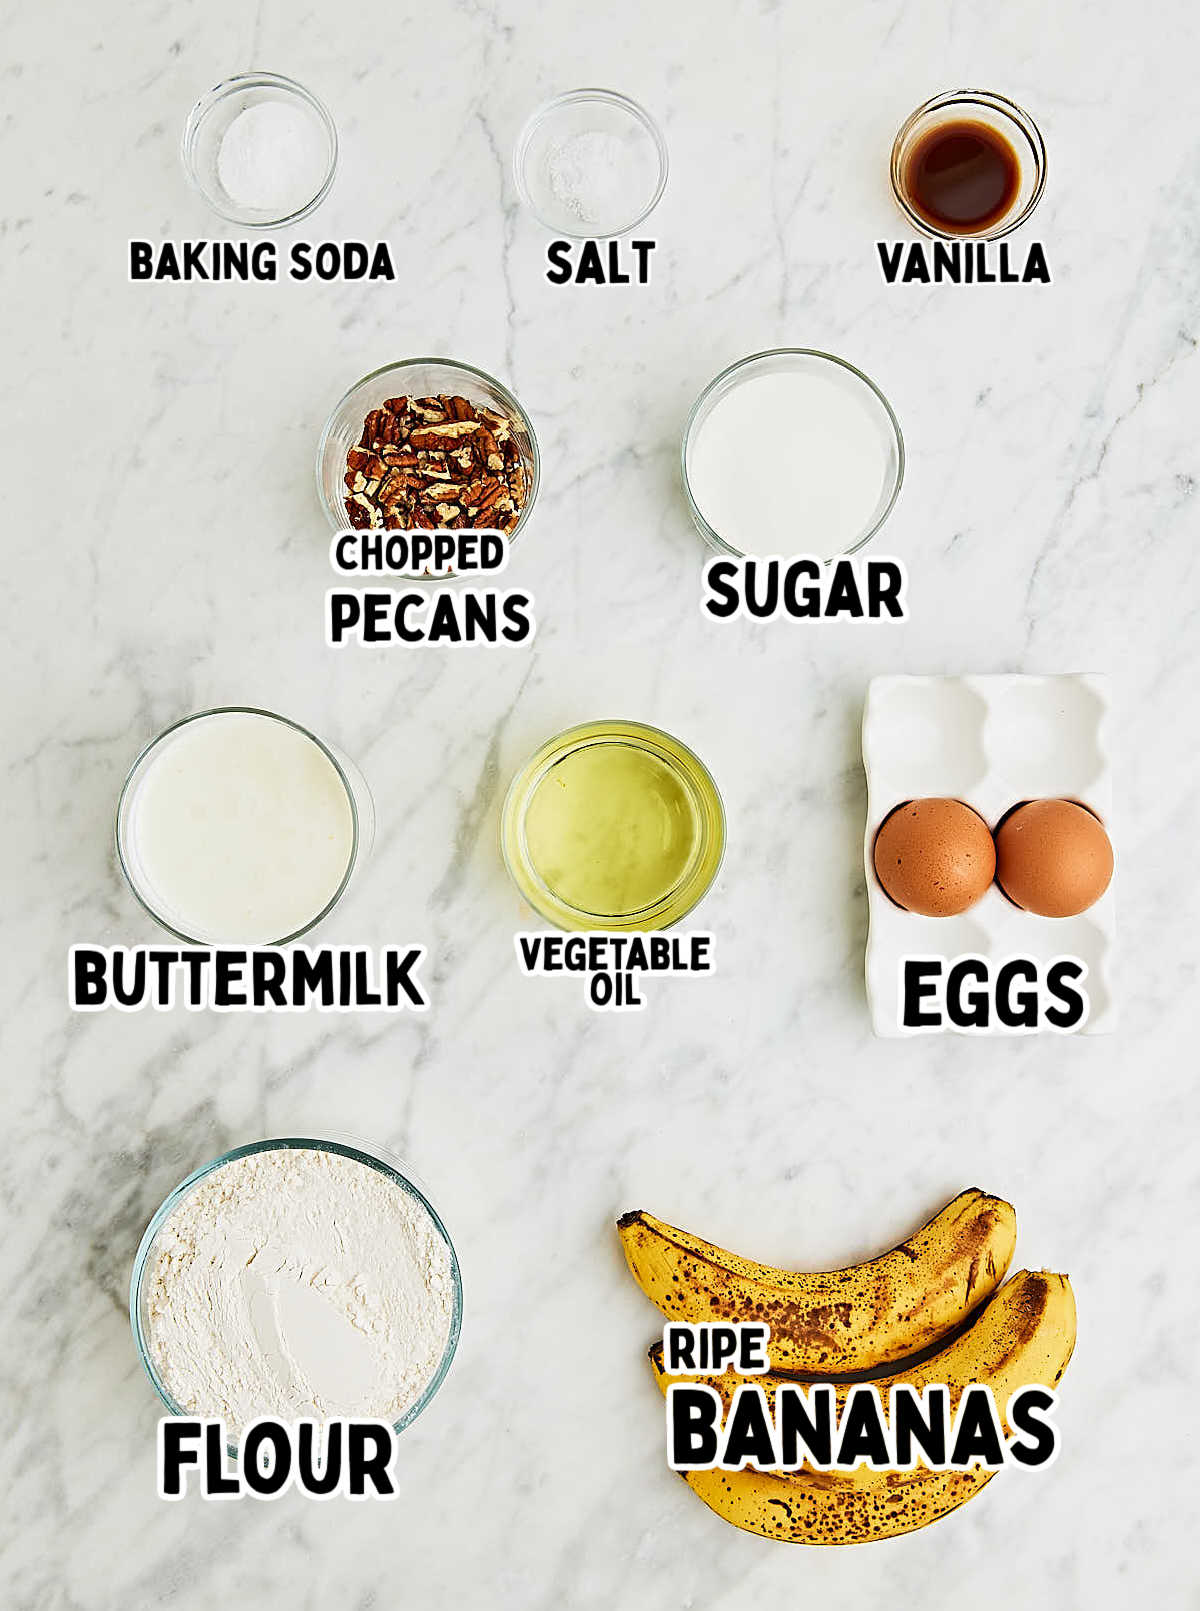 Ingredients needed to make a Banana Nut Bread.